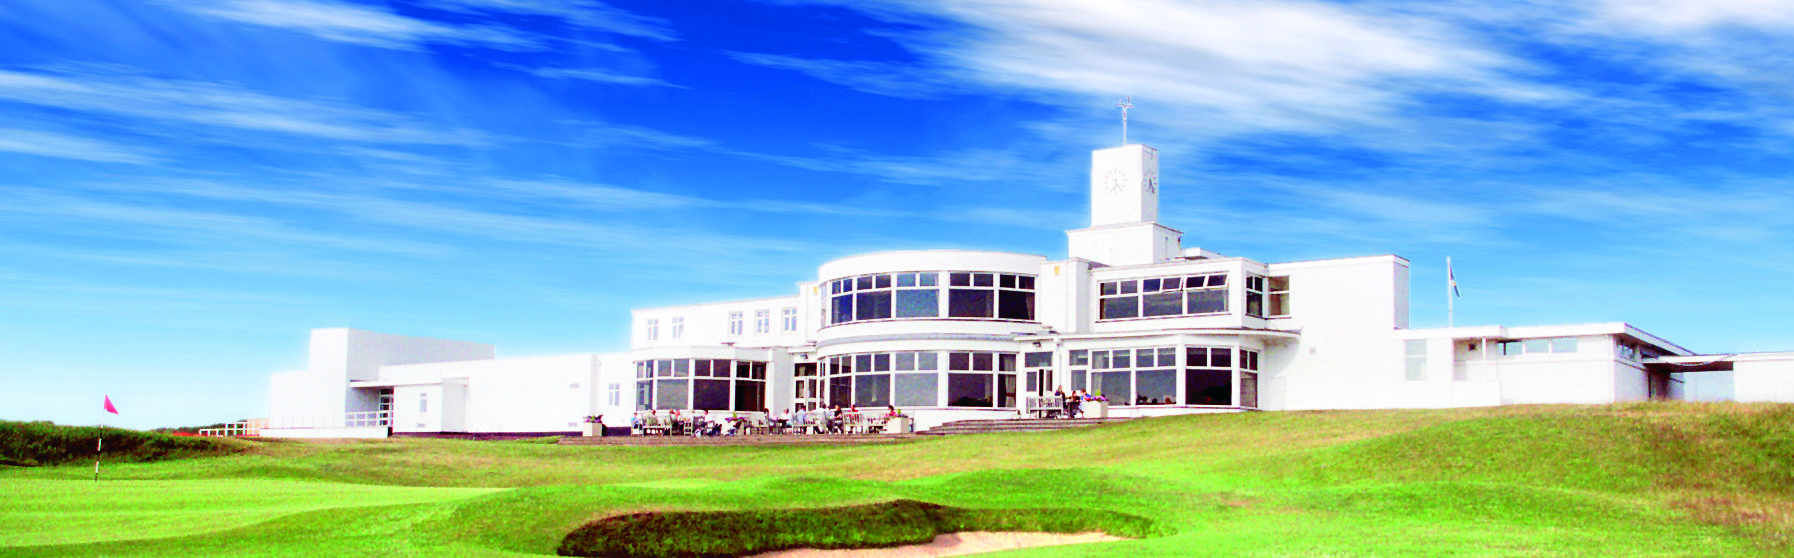 Birkdale Clubhousehi res